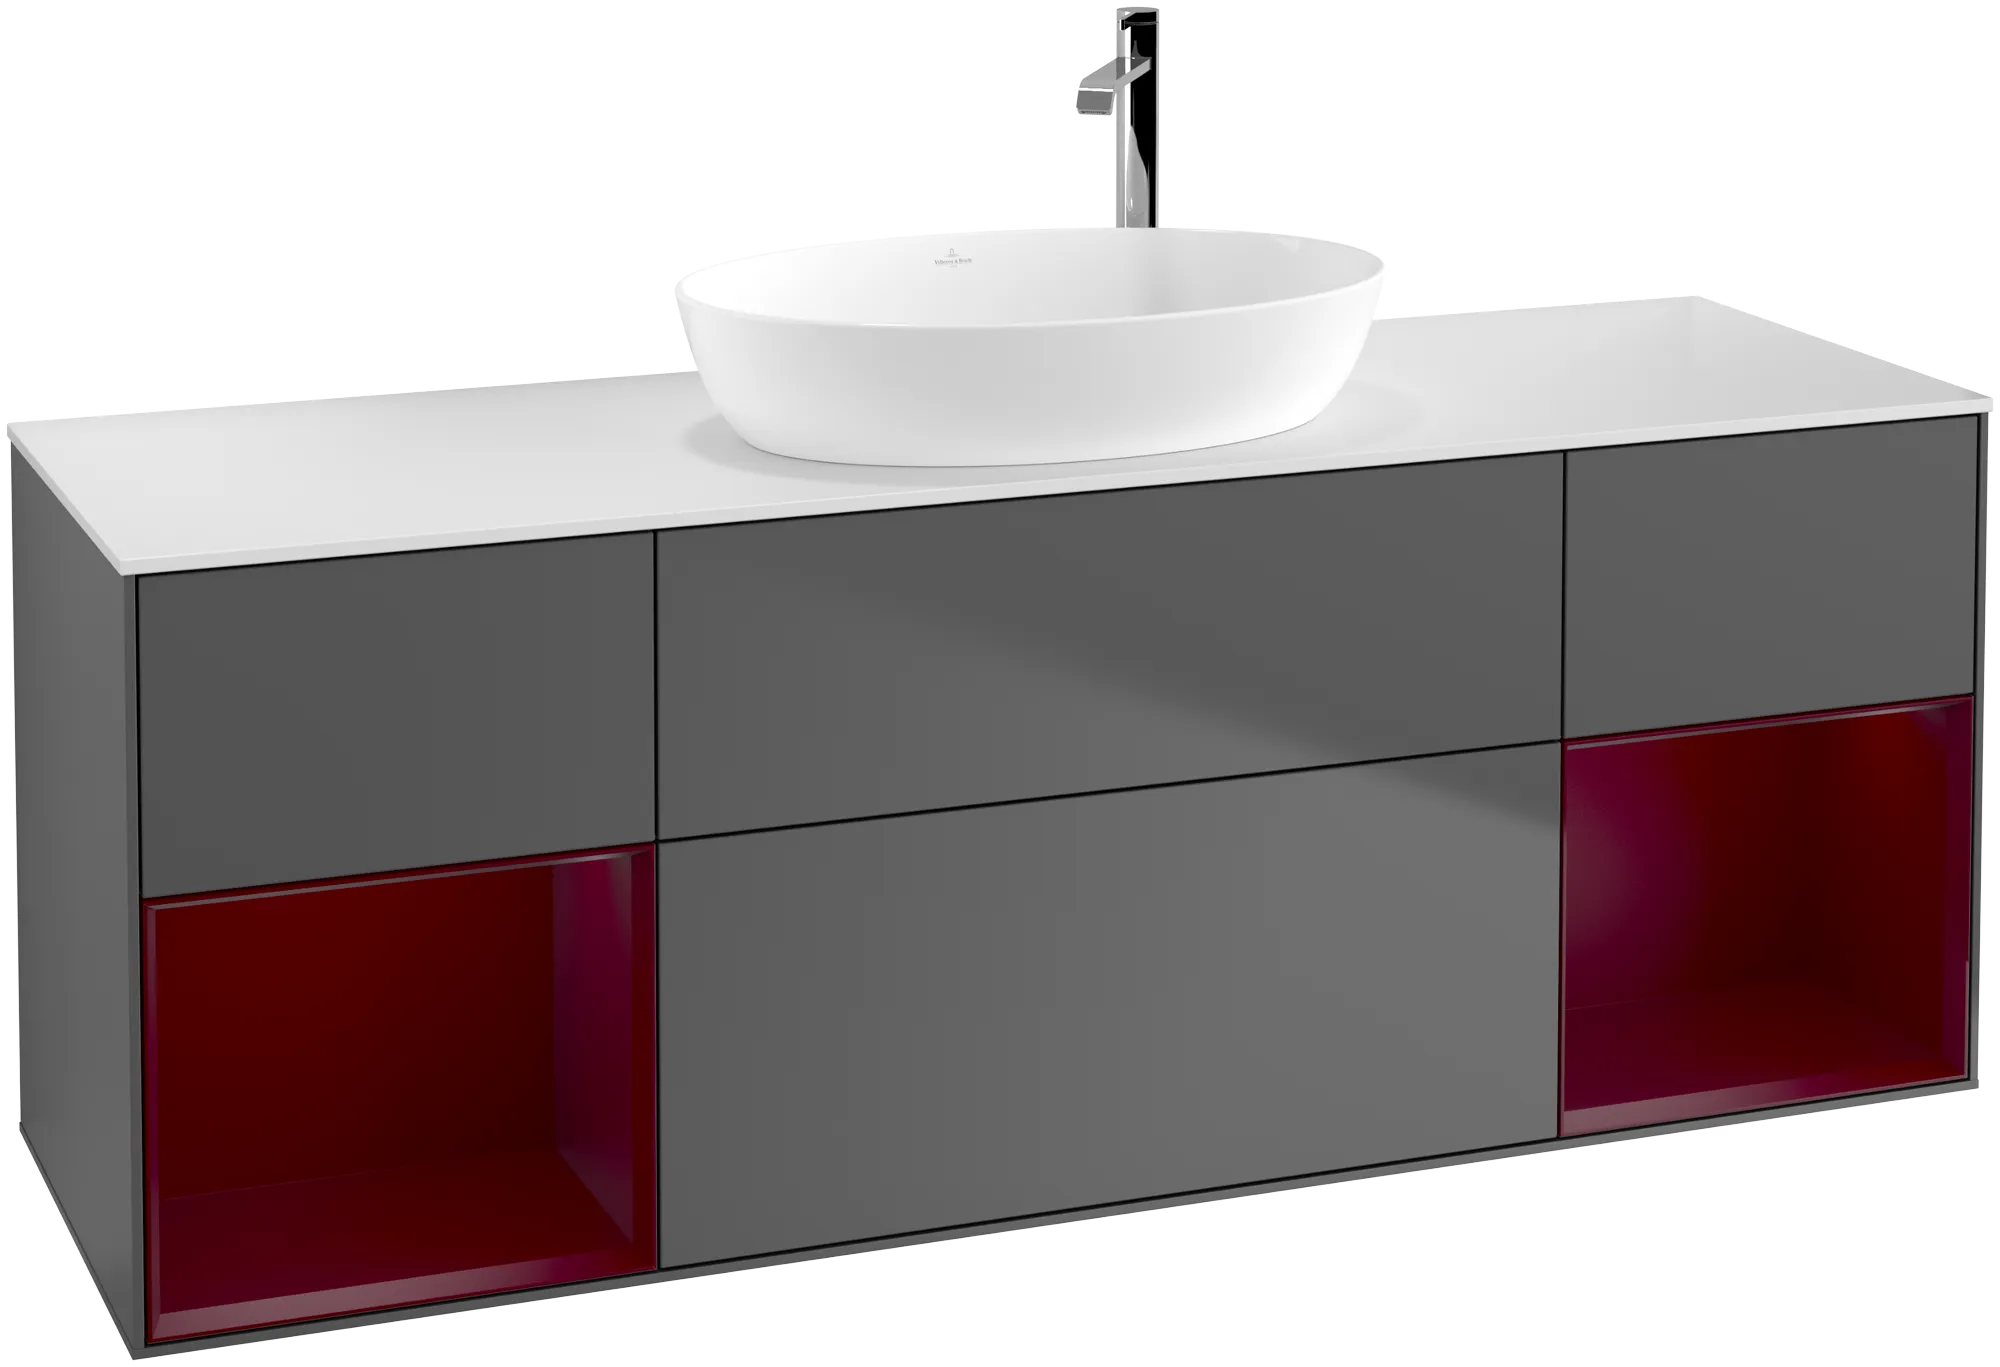 Obrázek VILLEROY BOCH Finion Vanity unit, with lighting, 4 pull-out compartments, 1600 x 603 x 501 mm, Anthracite Matt Lacquer / Peony Matt Lacquer / Glass White Matt #G981HBGK